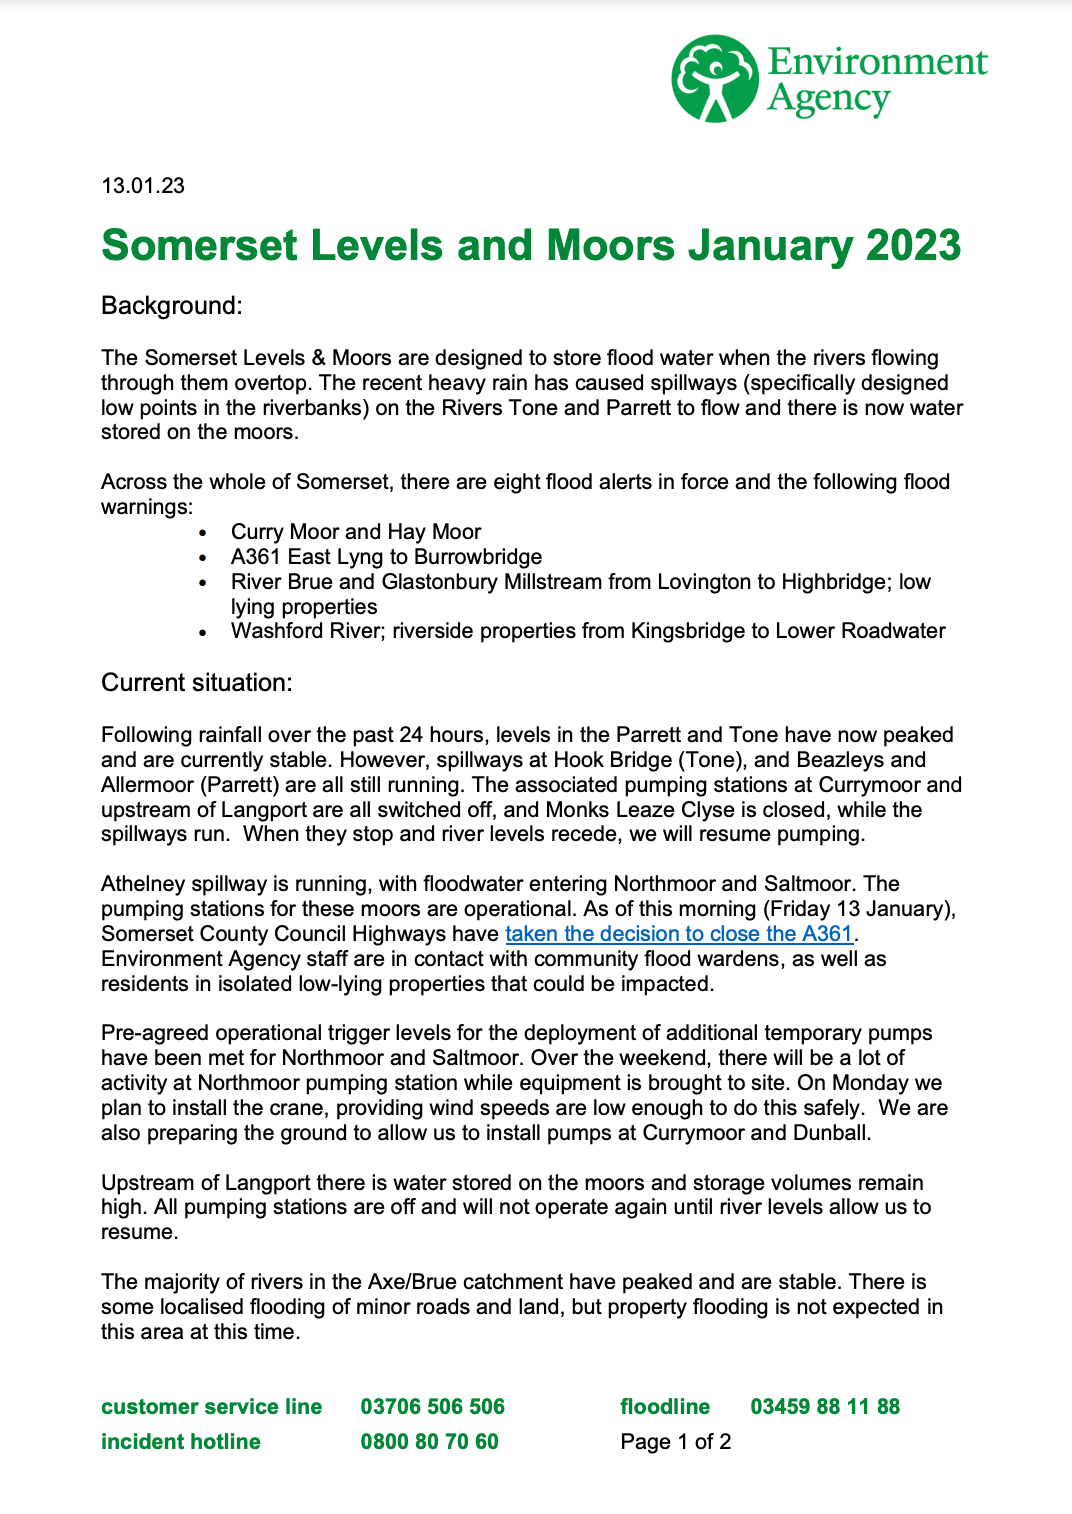 Somerset Rivers Authority Update